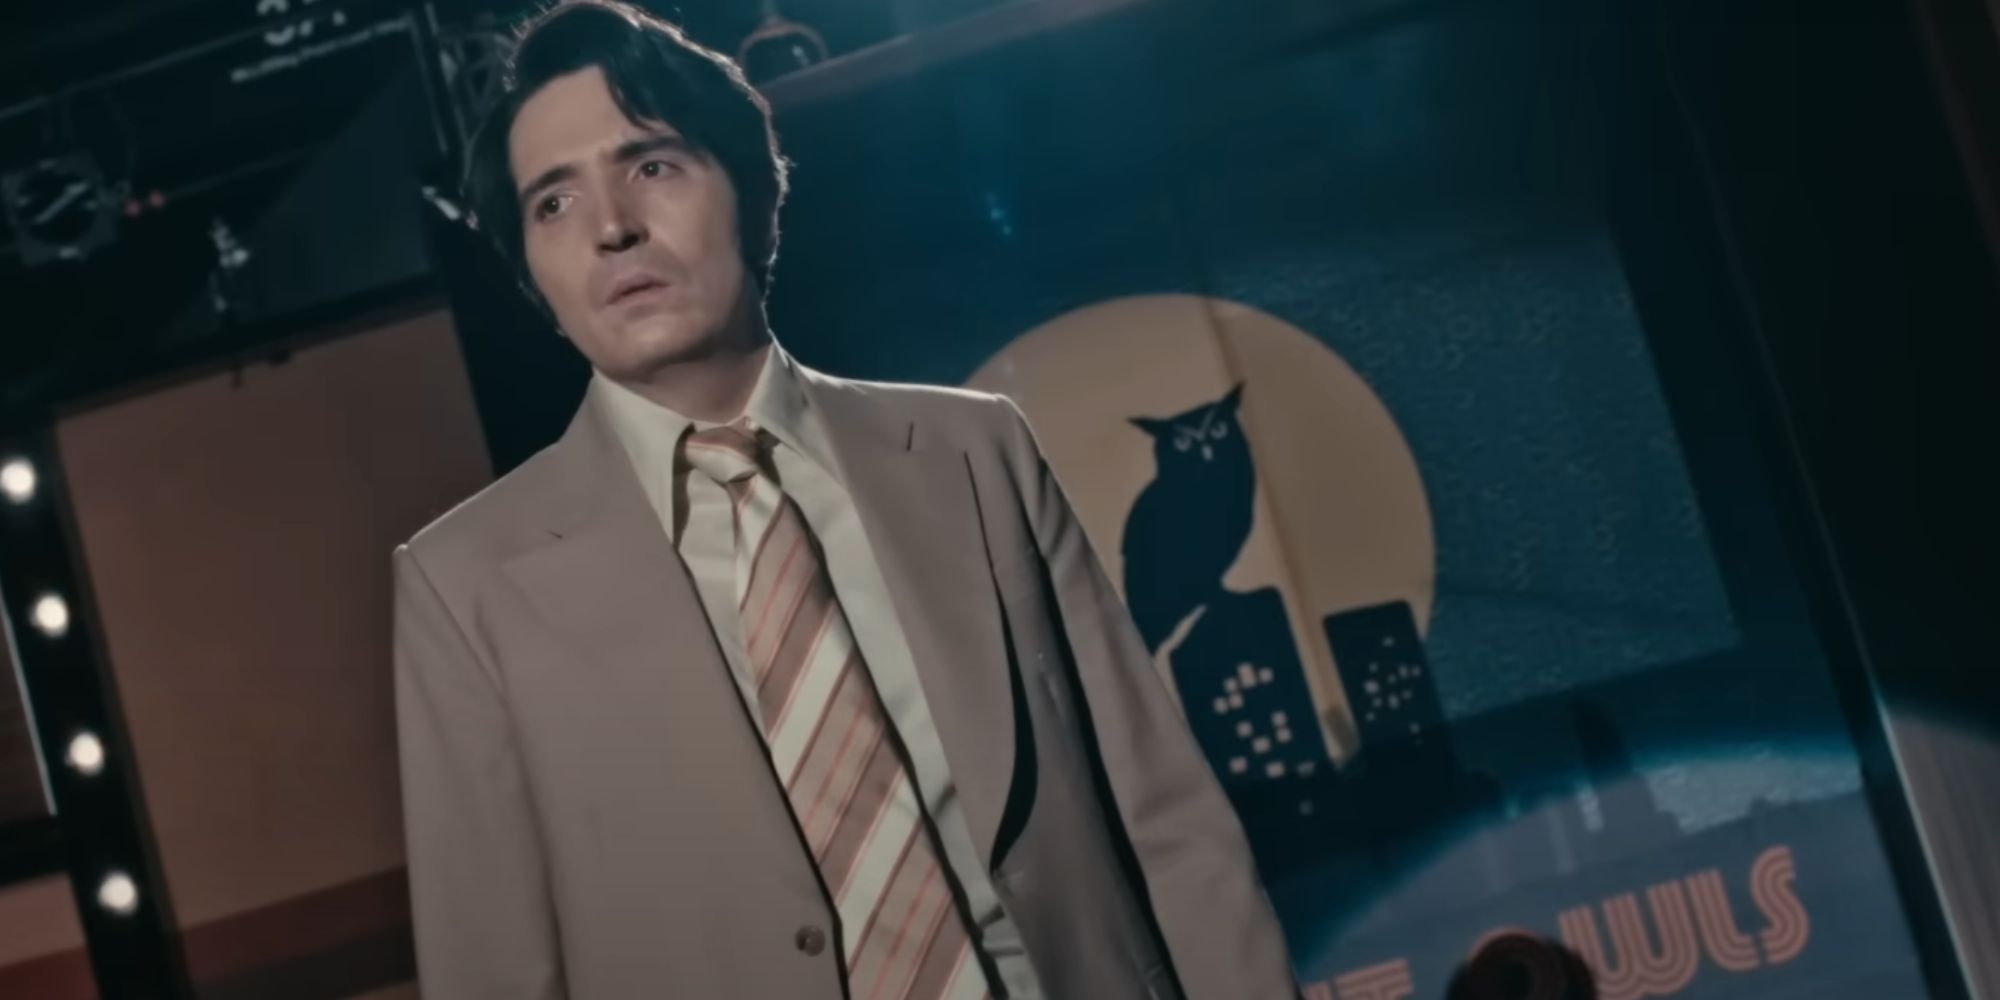 David Dastmalchian looking confused as Jack Delroy in the Late Night with the Devil trailer